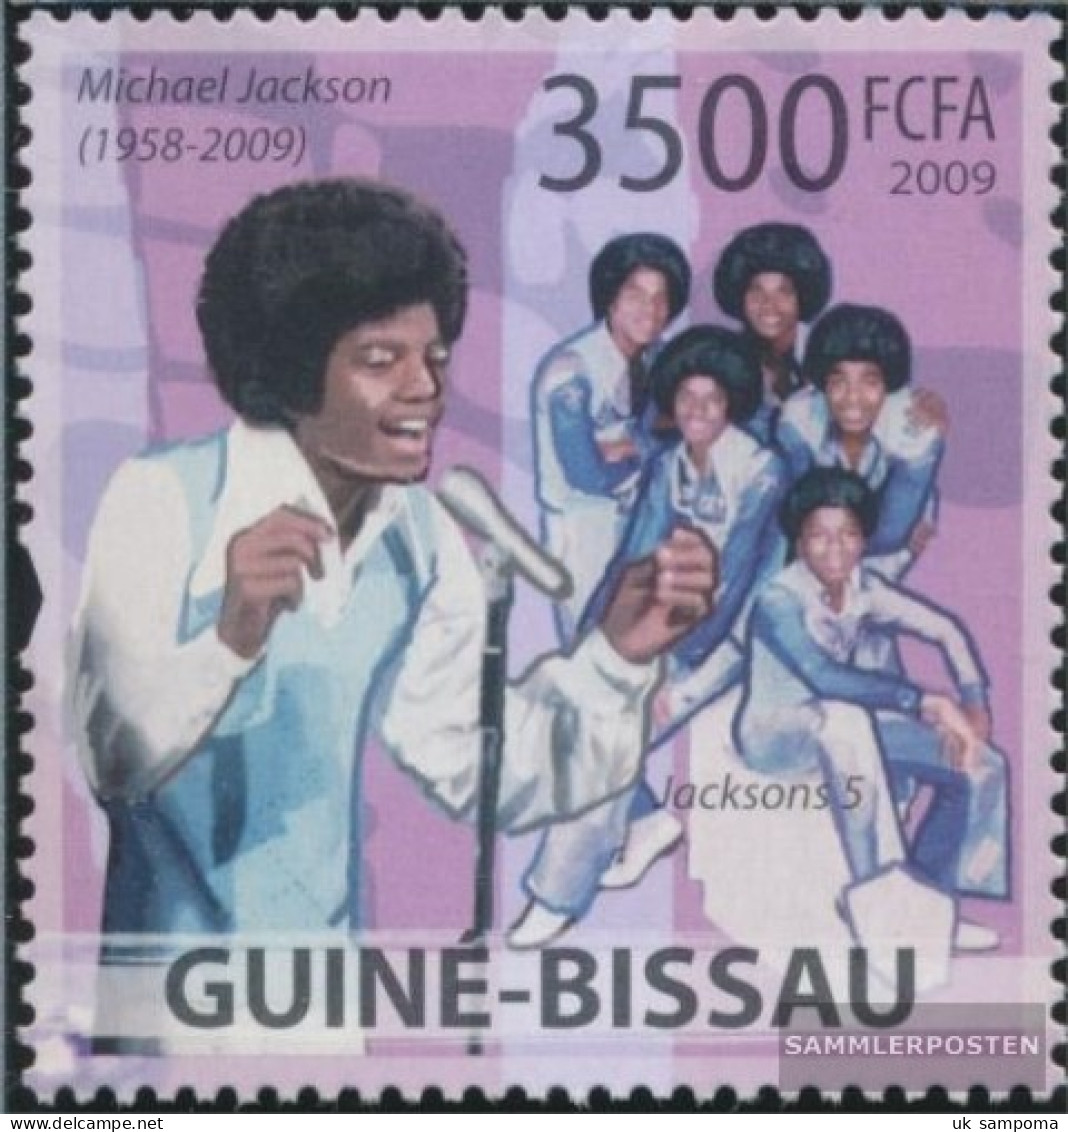 Guinea-Bissau 4308 (complete. Issue) Unmounted Mint / Never Hinged 2009 Michael Jackson - Guinea-Bissau